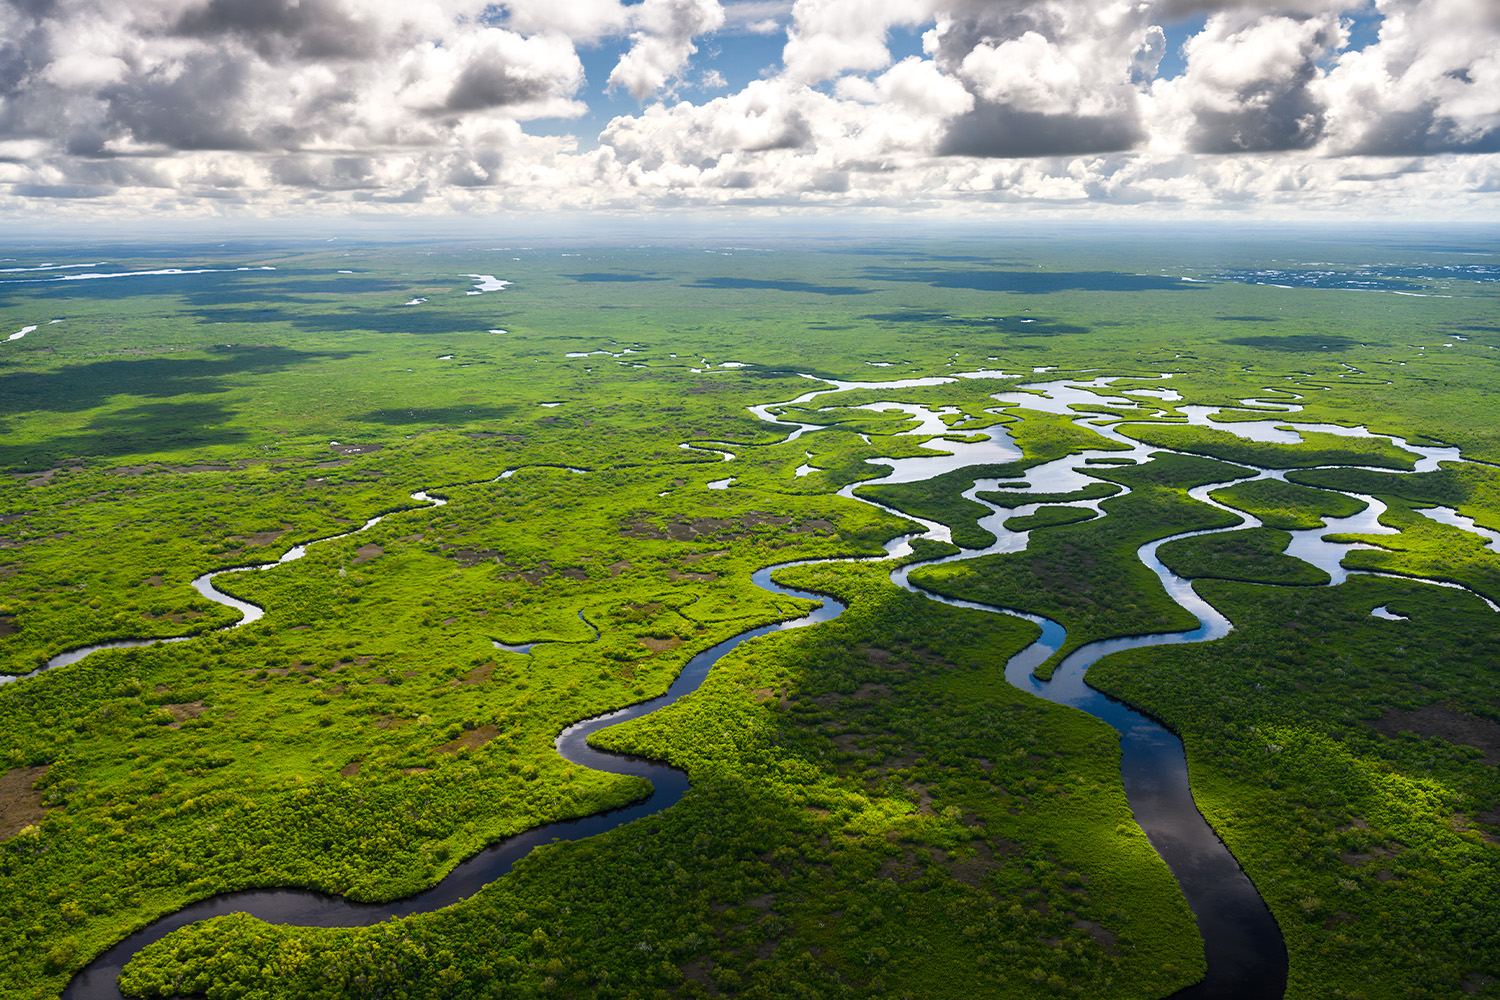 Aerial view of Everglades National Park in Florida